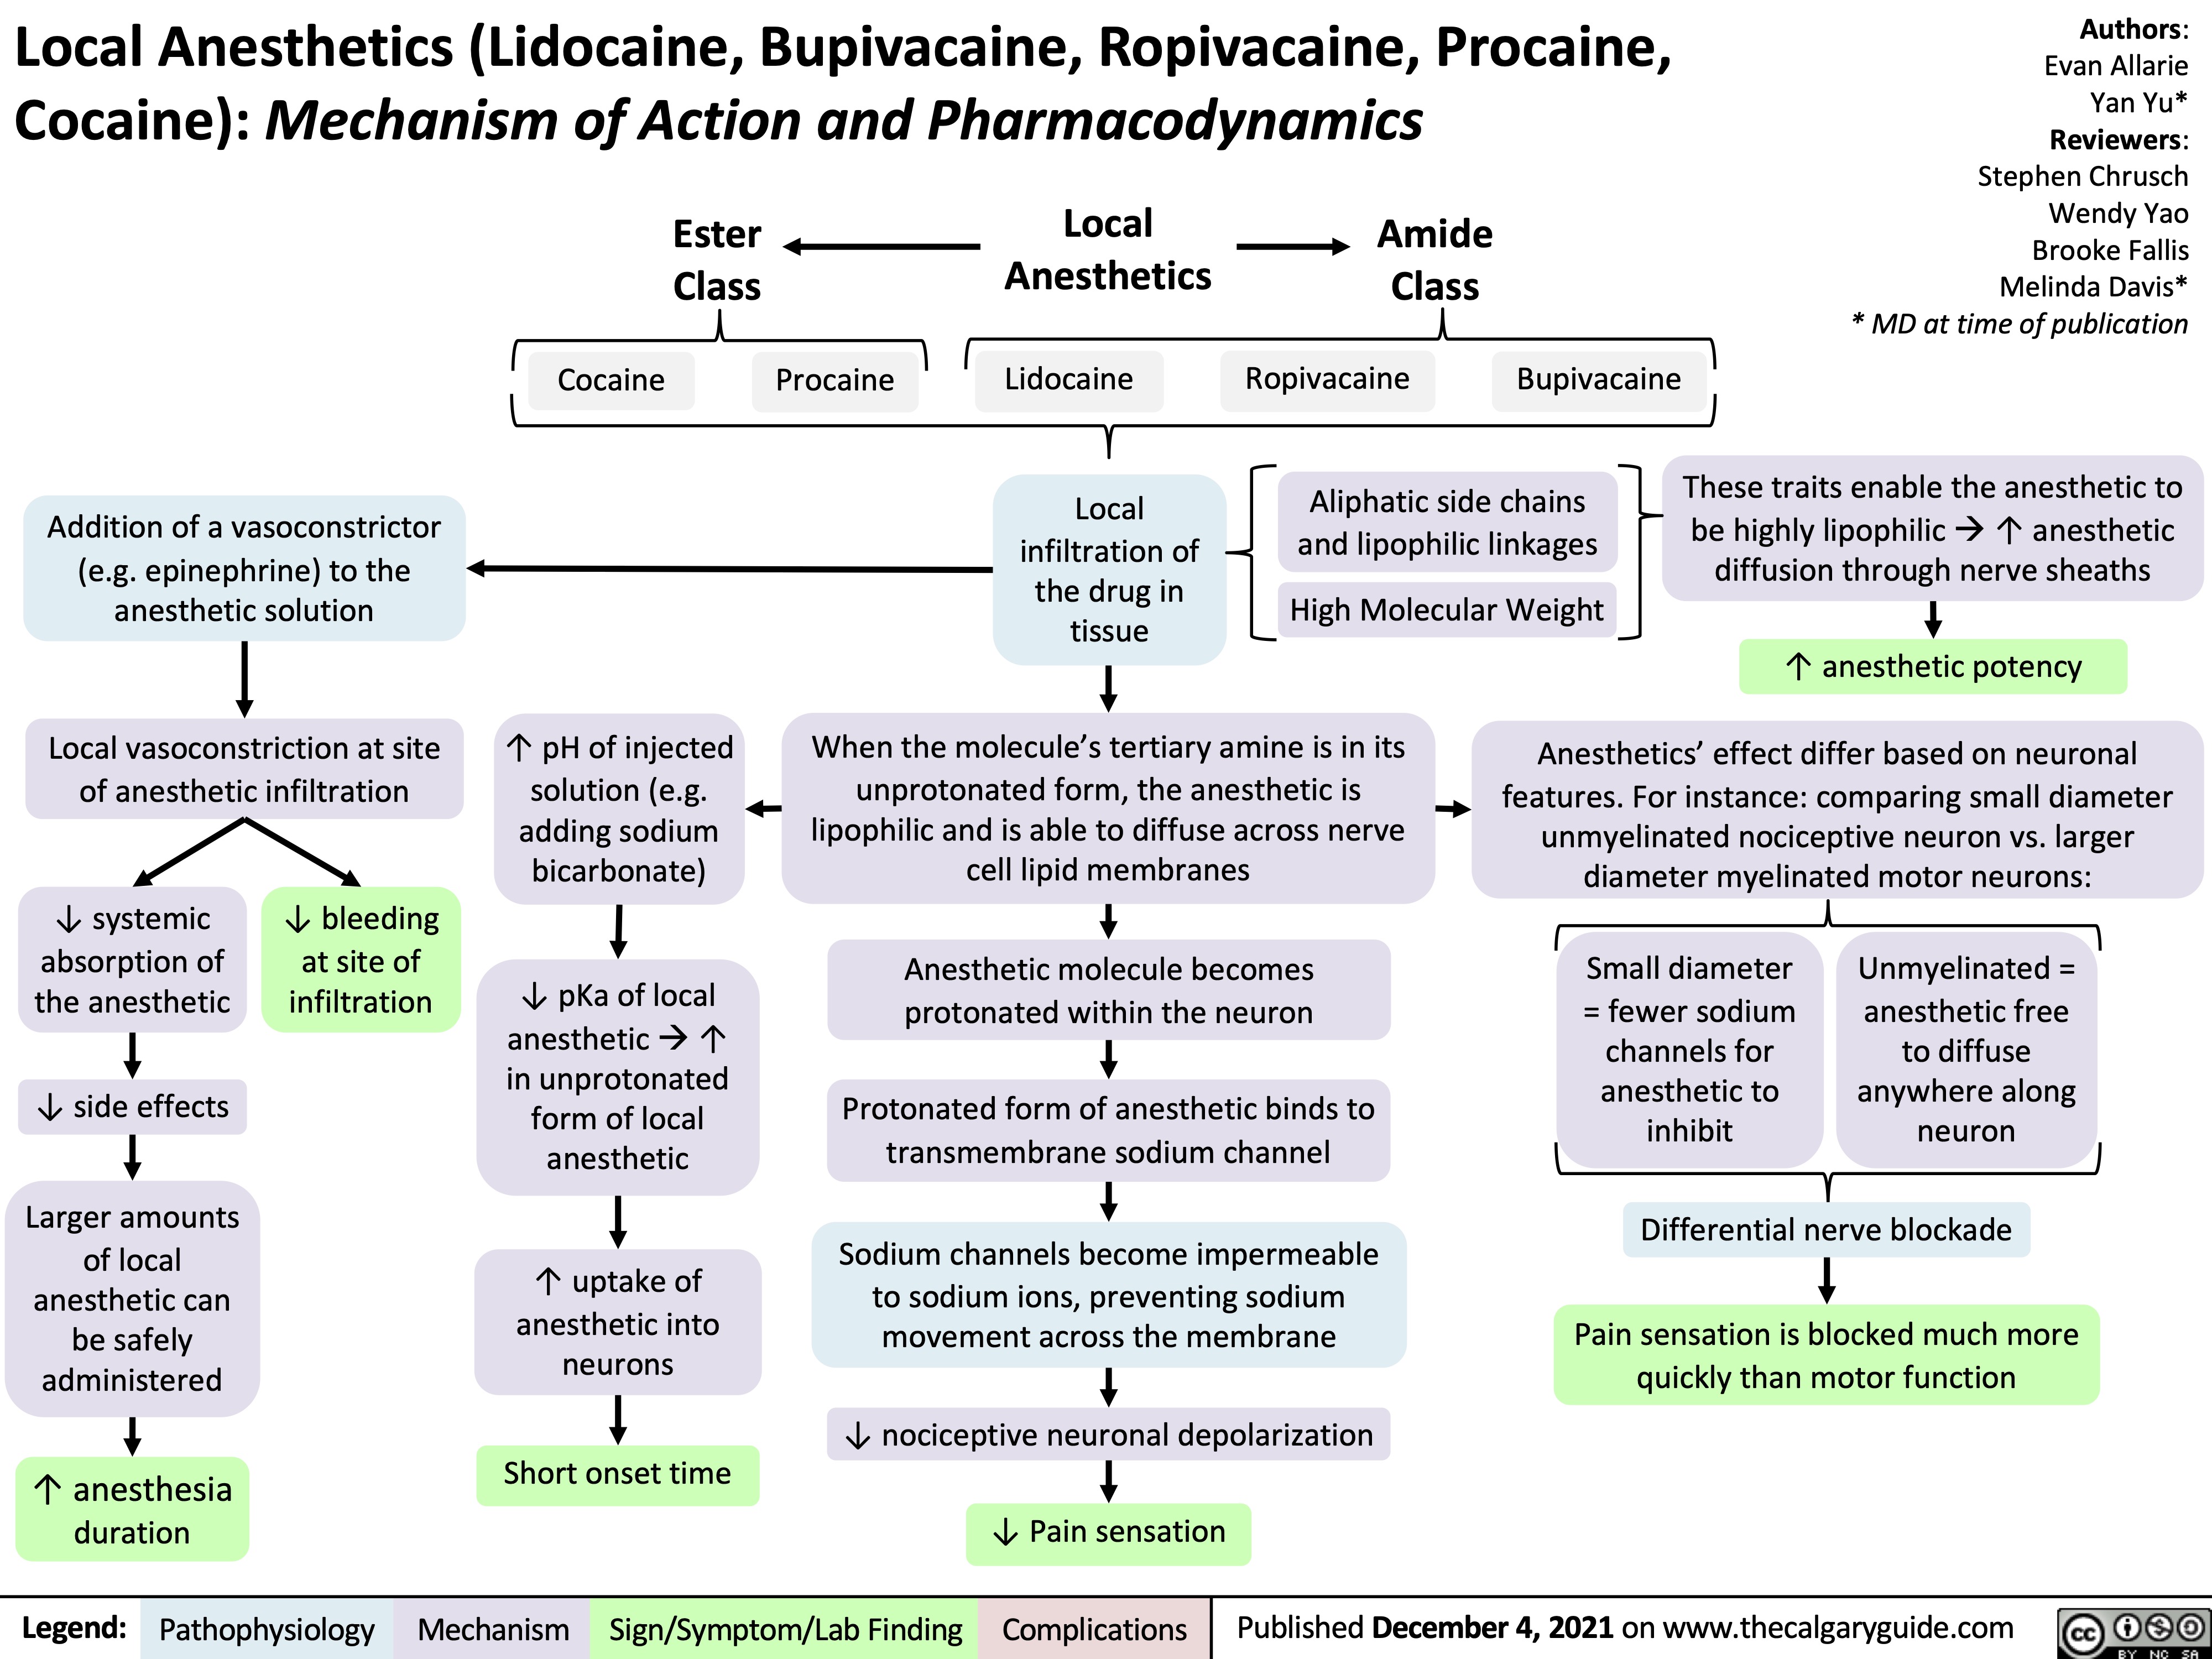 Local Anesthetics (Lidocaine, Bupivacaine, Ropivacaine, Procaine, Cocaine): Mechanism of Action and Pharmacodynamics
Ester Class
Cocaine
Local Anesthetics
Lidocaine
Local infiltration of the drug in tissue
Amide Class
Ropivacaine
Authors: Evan Allarie Yan Yu* Reviewers: Stephen Chrusch Wendy Yao Brooke Fallis Melinda Davis* * MD at time of publication
These traits enable the anesthetic to be highly lipophilicà↑ anesthetic diffusion through nerve sheaths
↑ anesthetic potency
Anesthetics’ effect differ based on neuronal features. For instance: comparing small diameter
unmyelinated nociceptive neuron vs. larger diameter myelinated motor neurons:
         Procaine
Bupivacaine
       Addition of a vasoconstrictor (e.g. epinephrine) to the anesthetic solution
Local vasoconstriction at site of anesthetic infiltration
Aliphatic side chains and lipophilic linkages
High Molecular Weight
           ↓ systemic absorption of the anesthetic
↓ side effects Larger amounts
of local anesthetic can be safely administered
↑ anesthesia duration
↓ bleeding at site of infiltration
↑ pH of injected solution (e.g. adding sodium bicarbonate)
↓ pKa of local anestheticà↑ in unprotonated form of local anesthetic
↑ uptake of anesthetic into neurons
Short onset time
When the molecule’s tertiary amine is in its unprotonated form, the anesthetic is lipophilic and is able to diffuse across nerve cell lipid membranes
Anesthetic molecule becomes protonated within the neuron
Protonated form of anesthetic binds to transmembrane sodium channel
Sodium channels become impermeable to sodium ions, preventing sodium movement across the membrane
↓ nociceptive neuronal depolarization ↓ Pain sensation
Small diameter = fewer sodium channels for anesthetic to inhibit
Unmyelinated = anesthetic free
to diffuse anywhere along neuron
          Differential nerve blockade
Pain sensation is blocked much more quickly than motor function
        Legend:
 Pathophysiology
Mechanism
Sign/Symptom/Lab Finding
 Complications
Published December 4, 2021 on www.thecalgaryguide.com
    